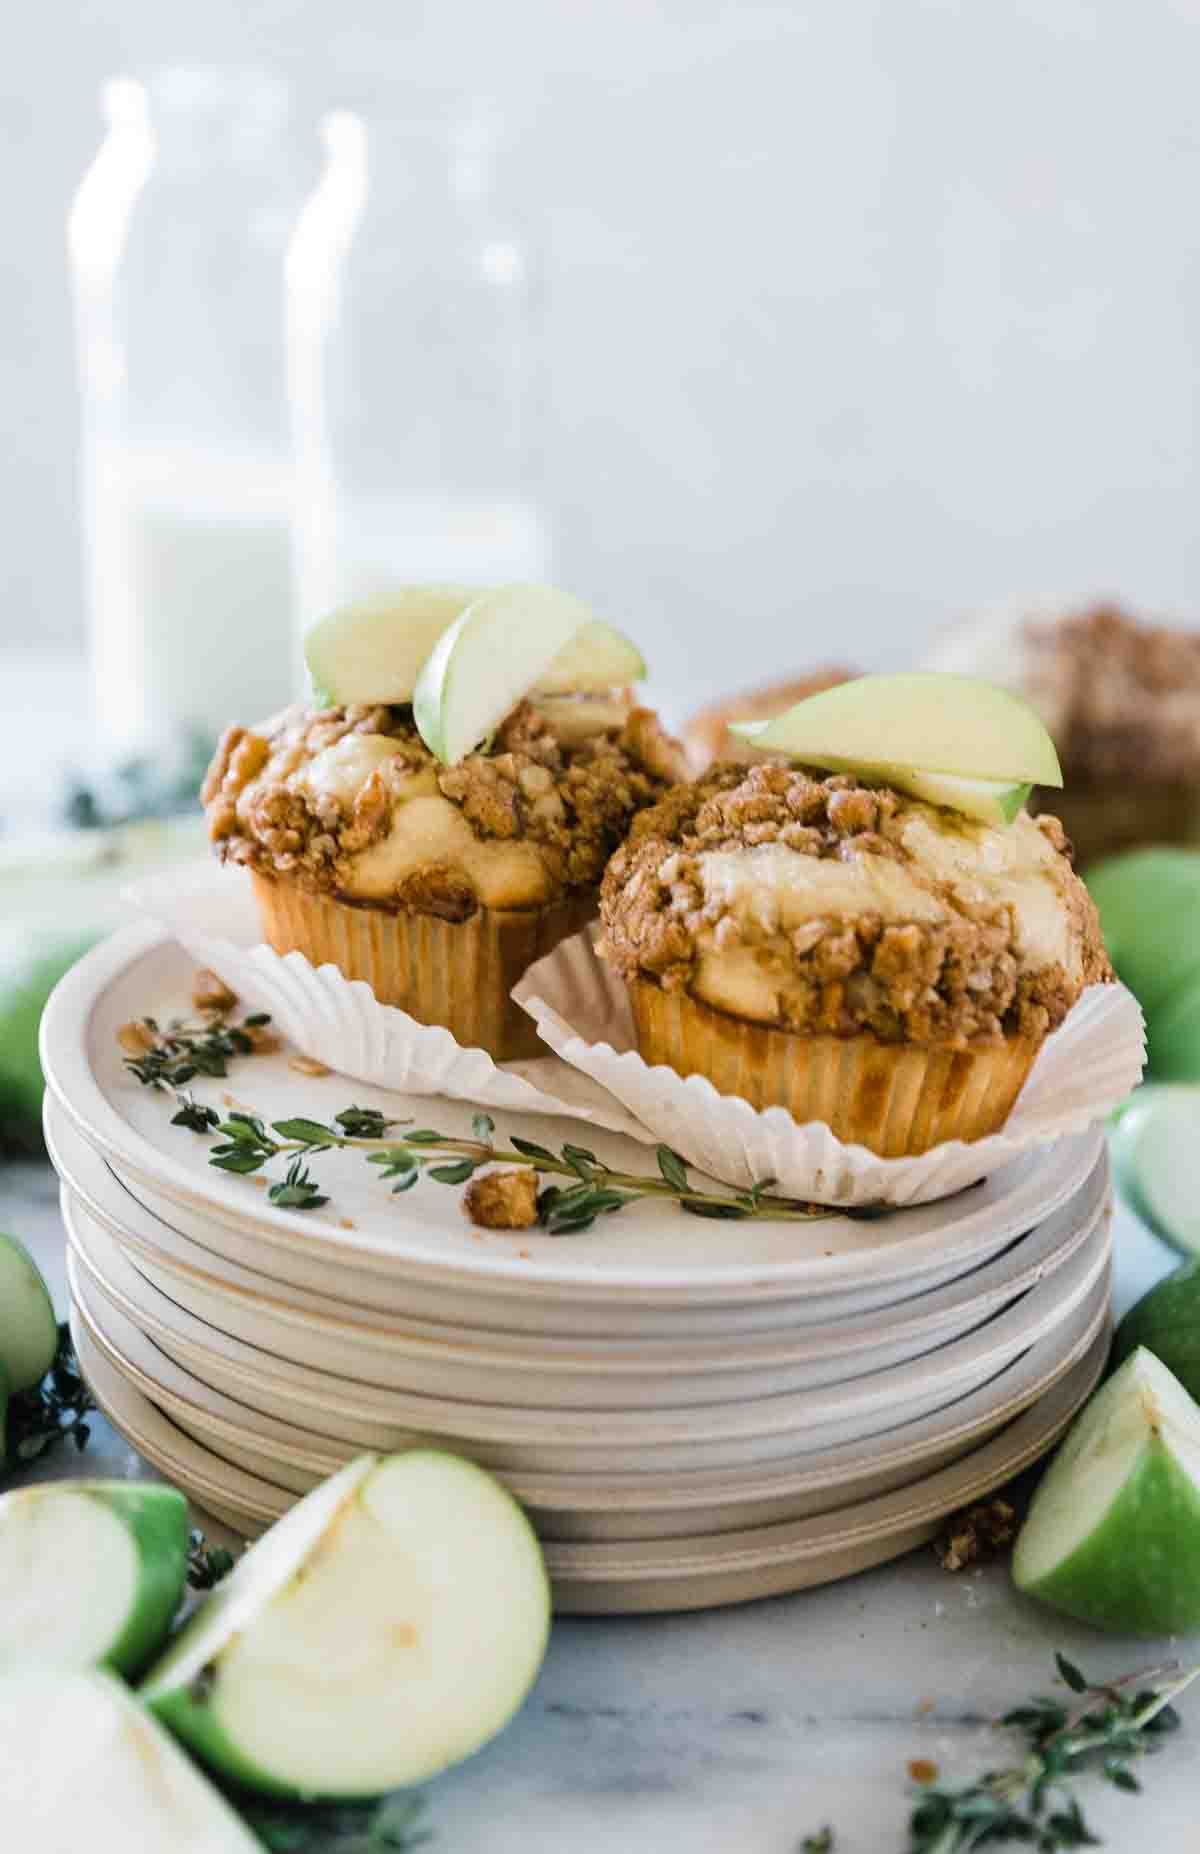 Two apple muffins on a stack of grey dessert plates. There are bottles of milk in the background.